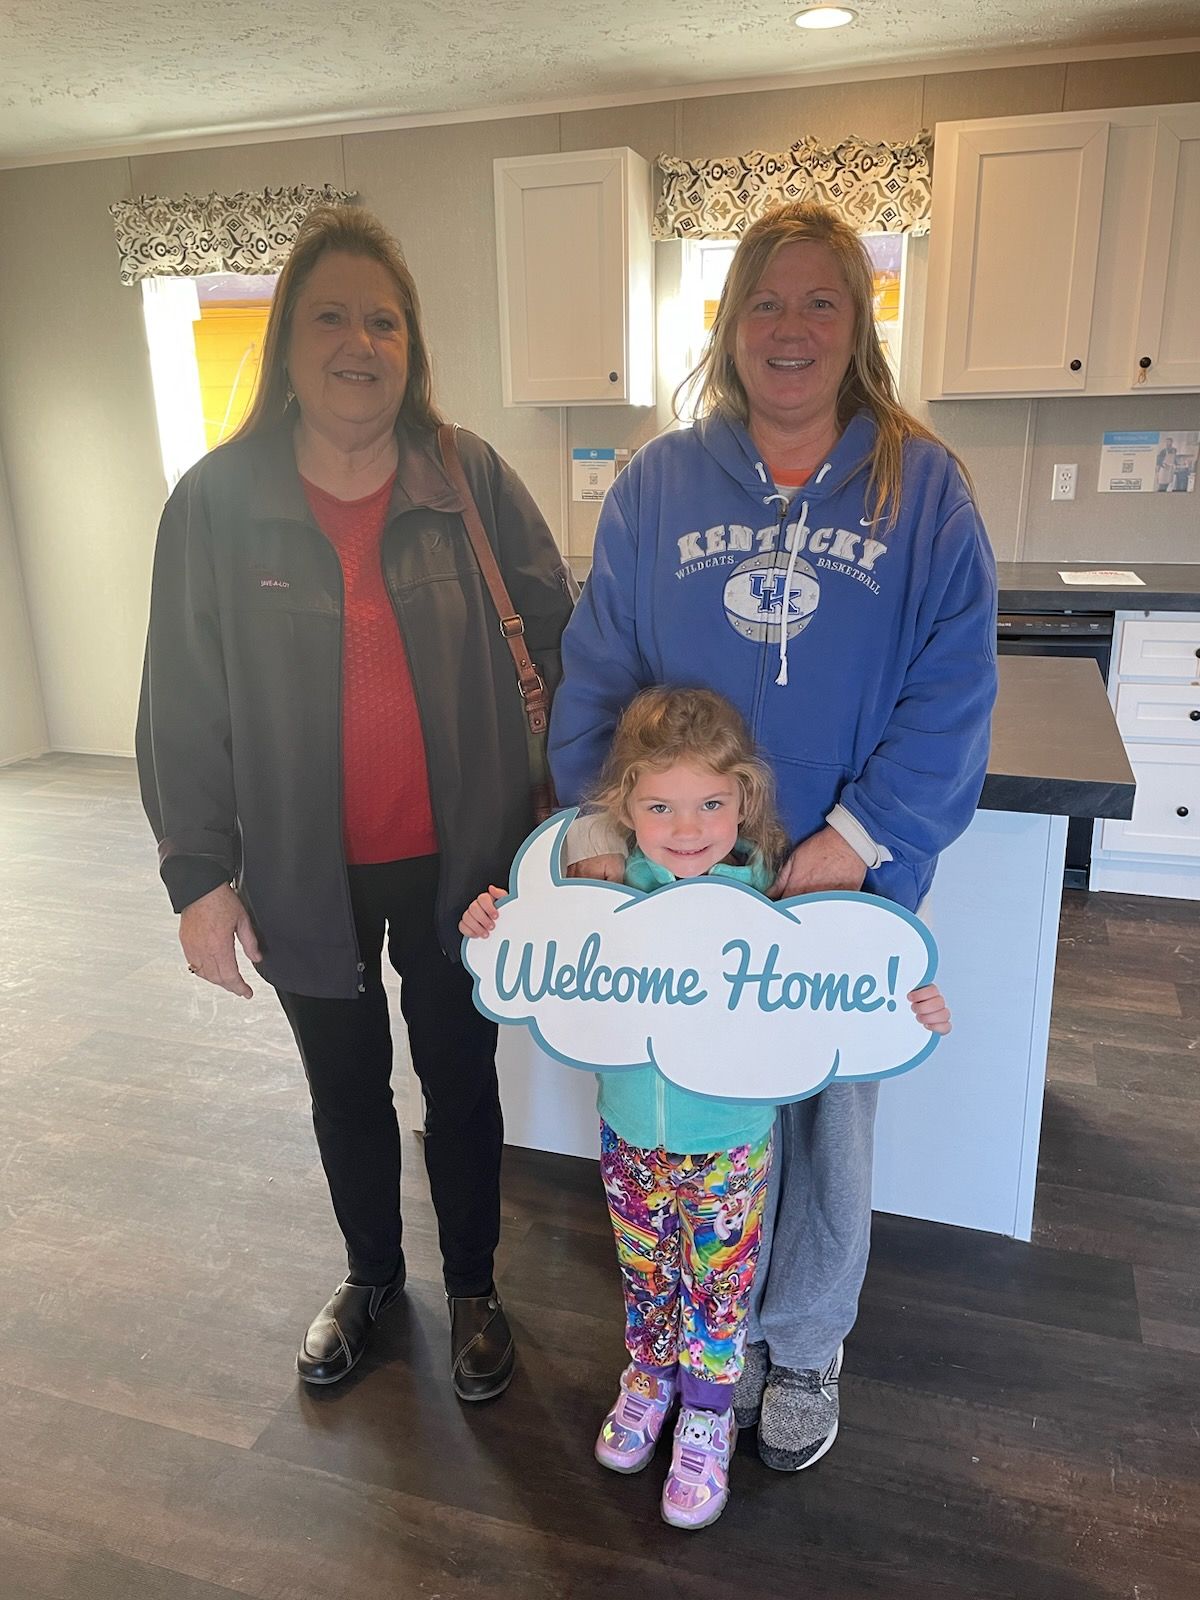 KATHY M. welcome home image